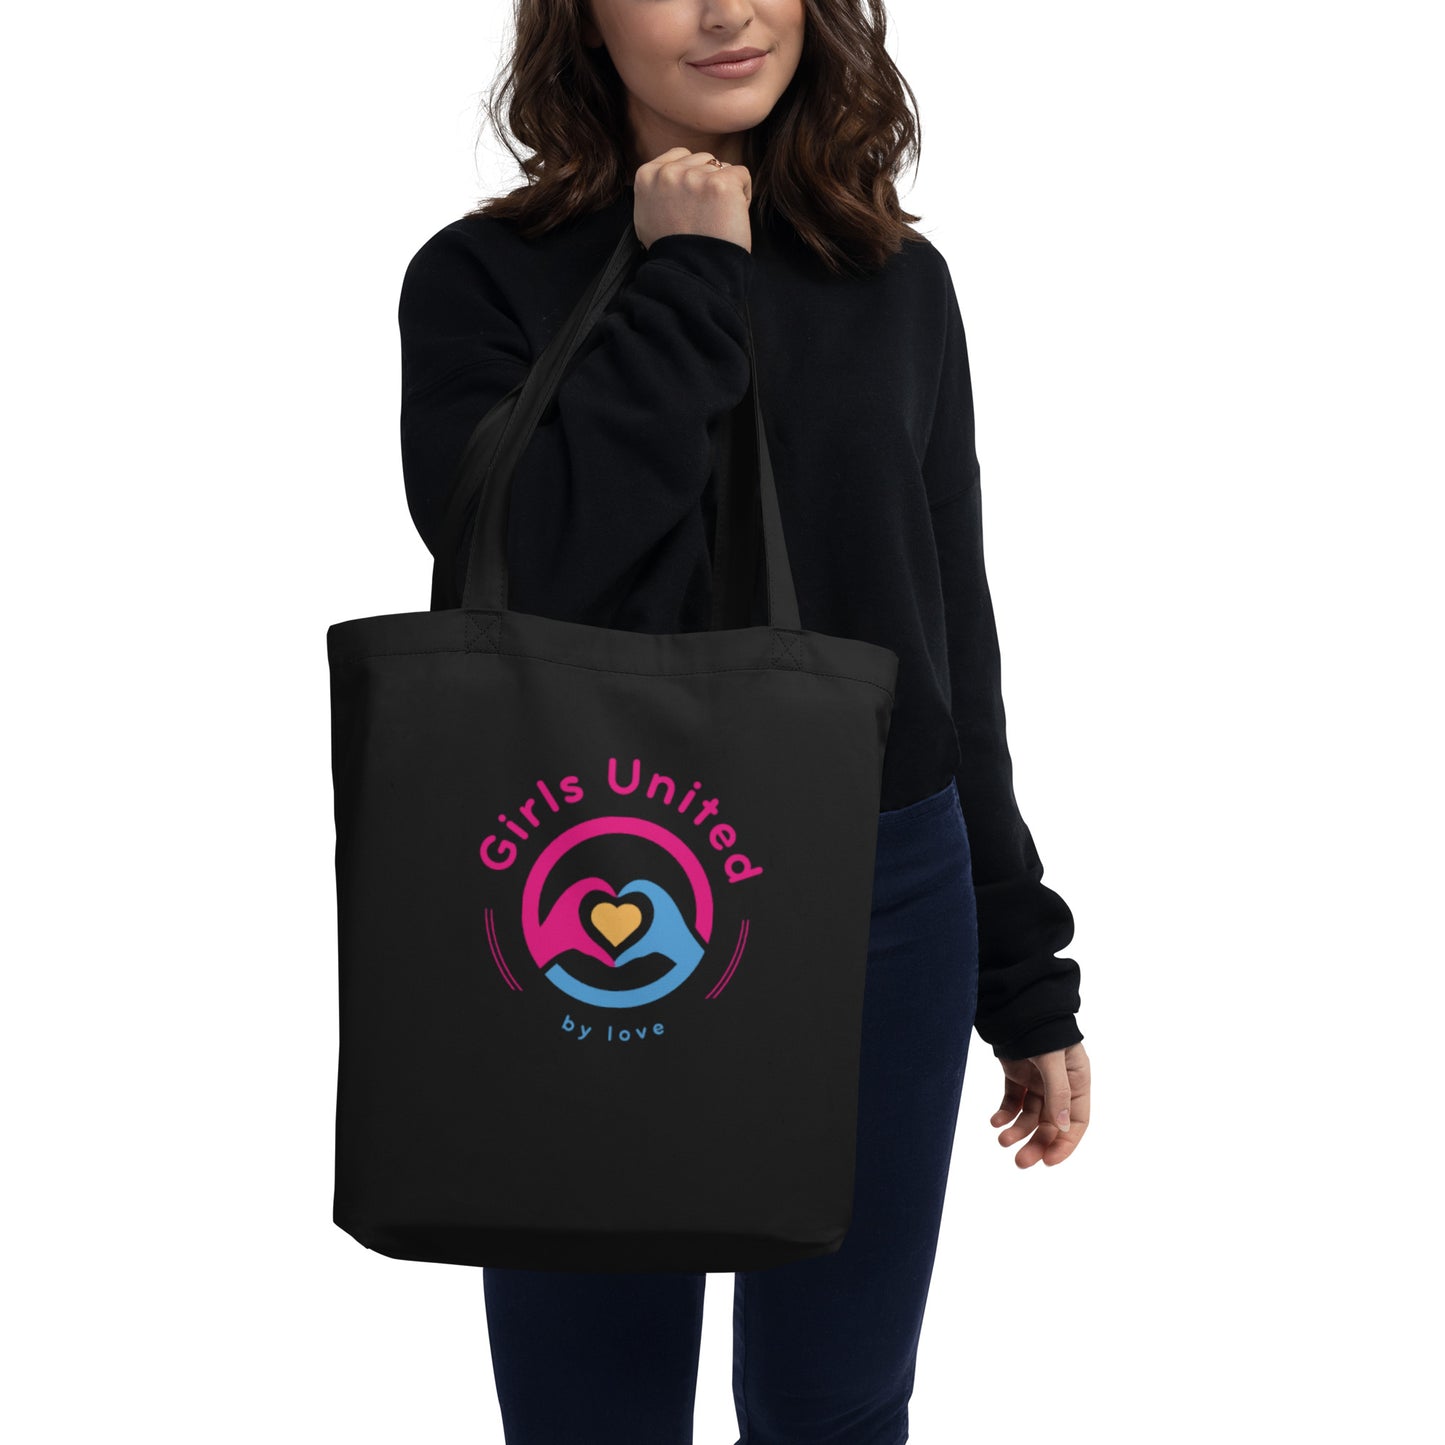 Girls United By Love Eco Tote Bag